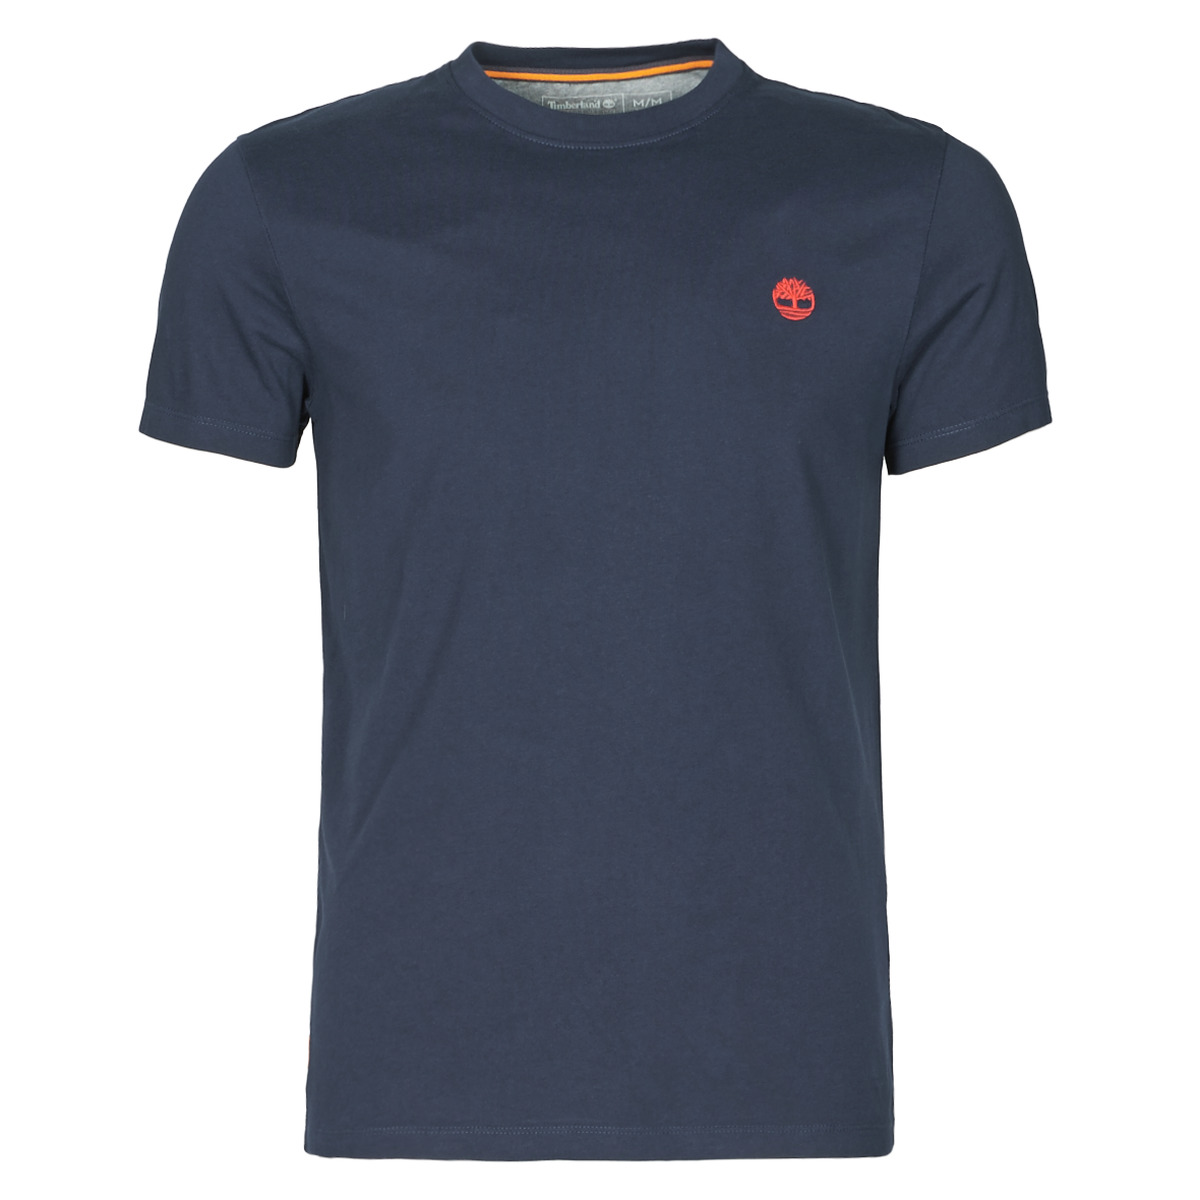 Timberland SS DUNSTAN - delivery short-sleeved | SLIM 33,00 ! Spartoo Europe Clothing - Men TEE POCKET € Fast RIVER Marine t-shirts